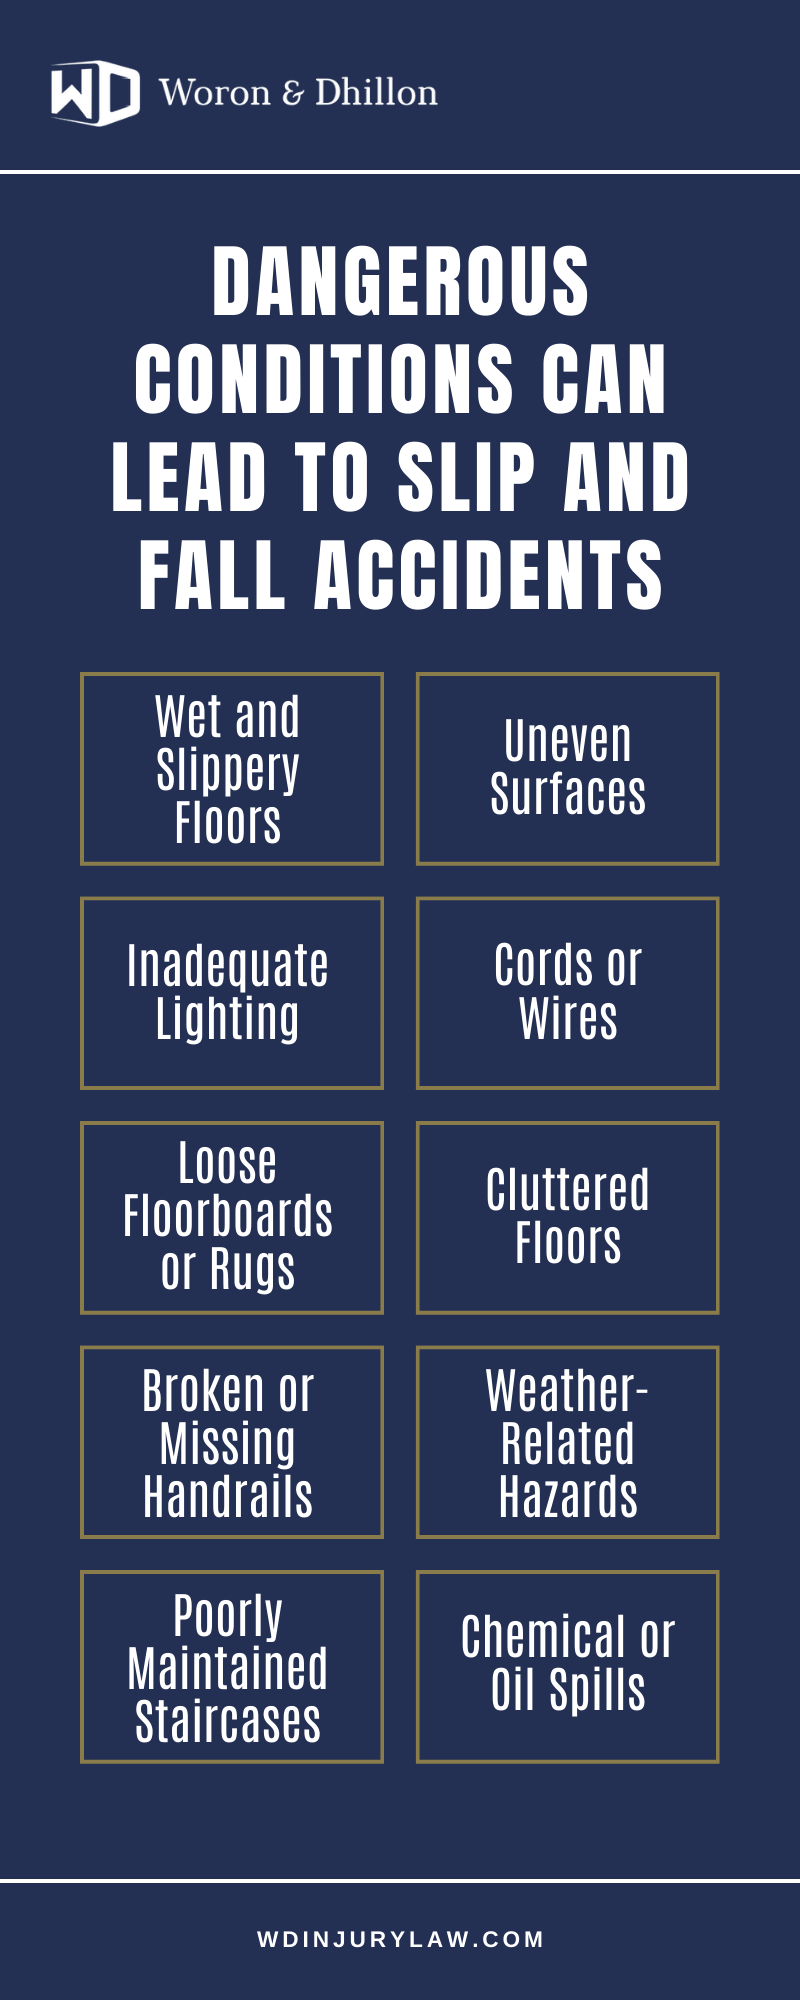 Dangerous Conditions Can Lead To Slip And Fall Accidents Infographic 